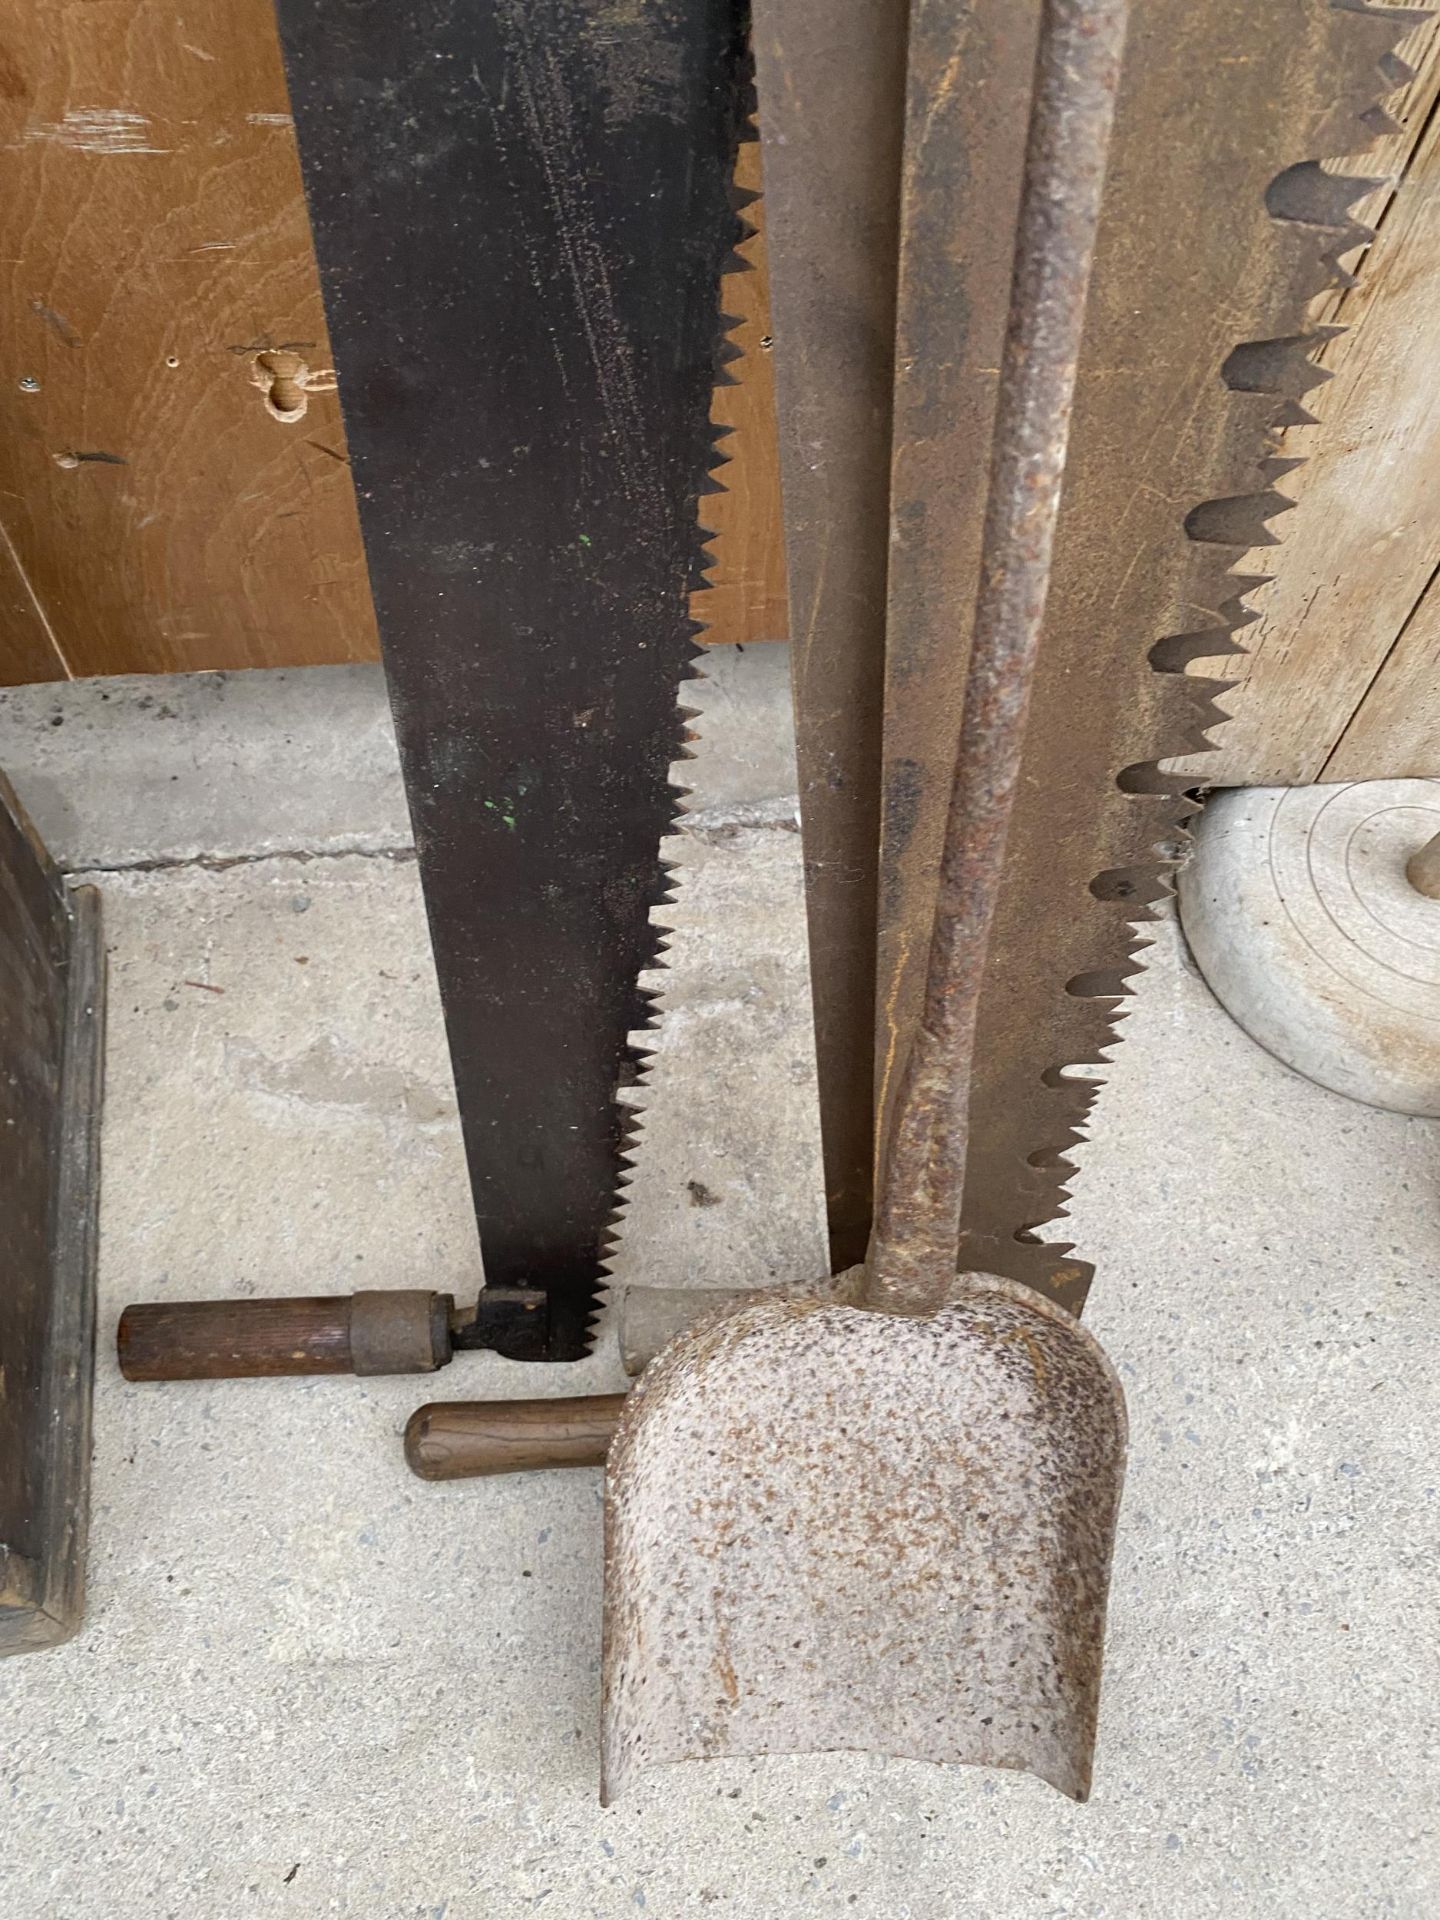 THREE VINTAGE CROSS CUT SAWS AND A VINTAGE CAST IRON DOUGH SHOVEL - Image 2 of 4